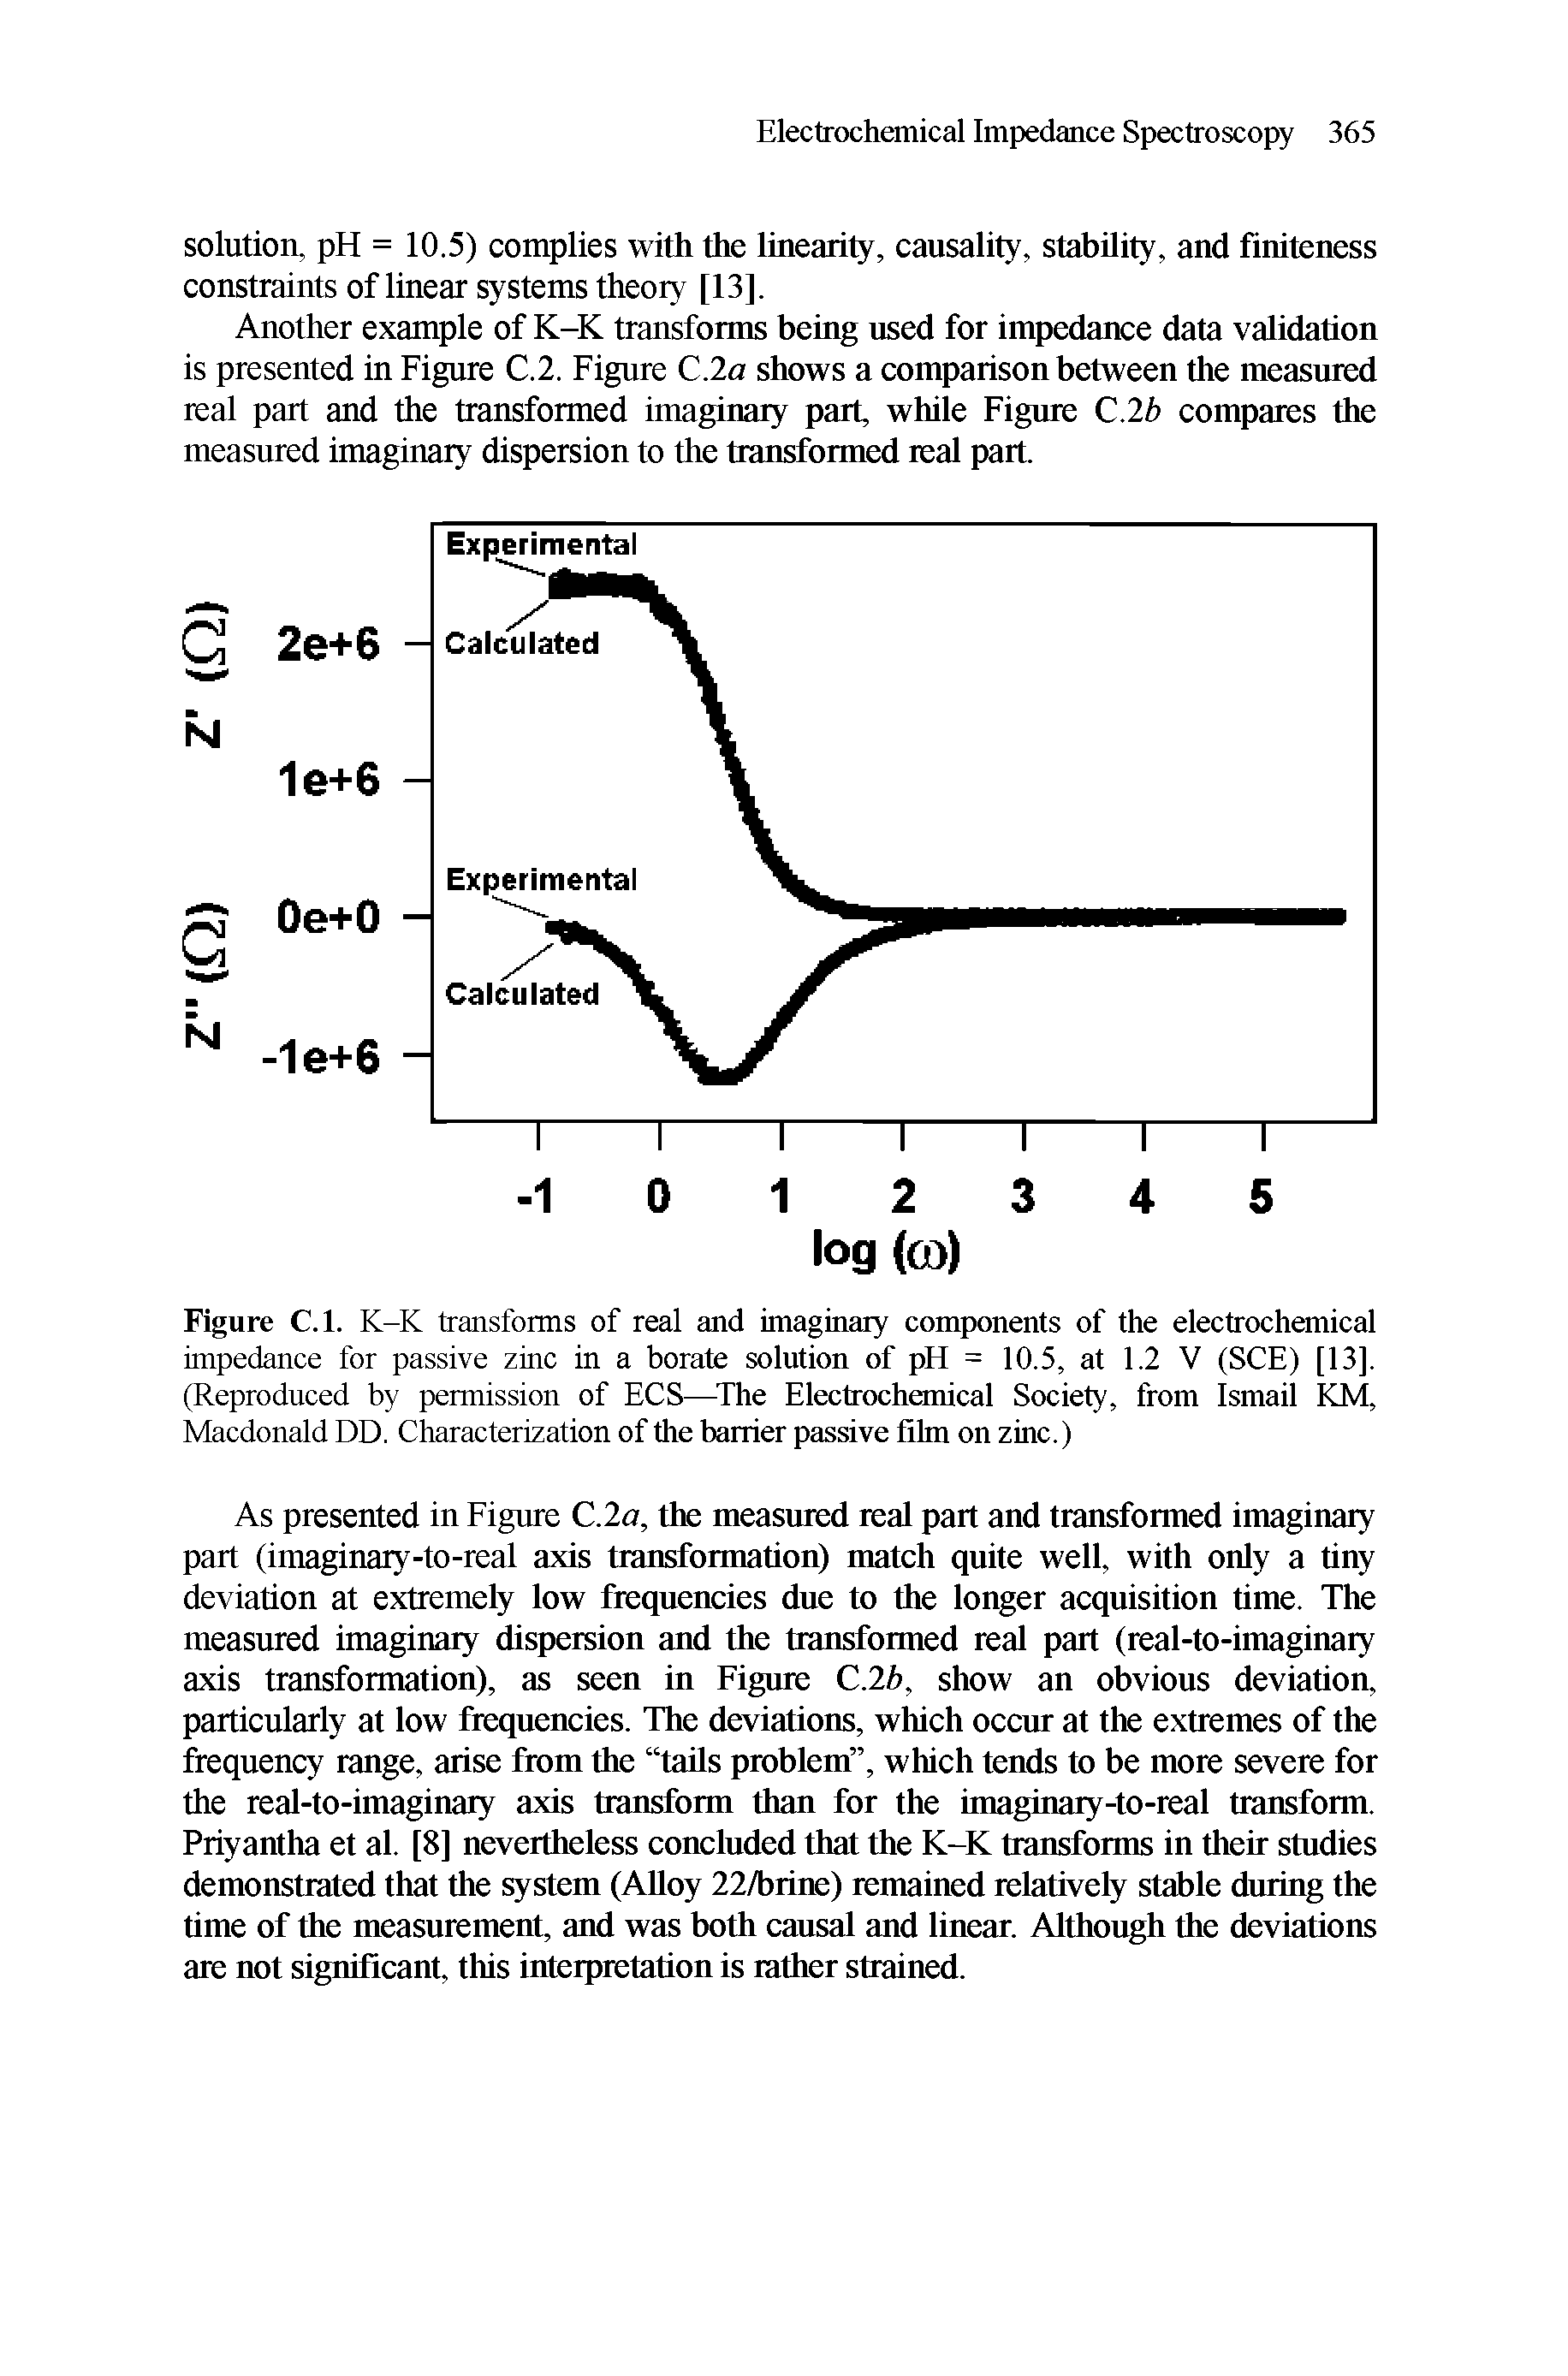 Figure C.l. K-K transforms of real and imaginary components of the electrochemical impedance for passive zinc in a borate solution of pH = 10.5, at 1.2 V (SCE) [13]. (Reproduced by permission of ECS—The Electrochemical Society, from Ismail KM, Macdonald DD. Characterization of the barrier passive film on zinc.)...